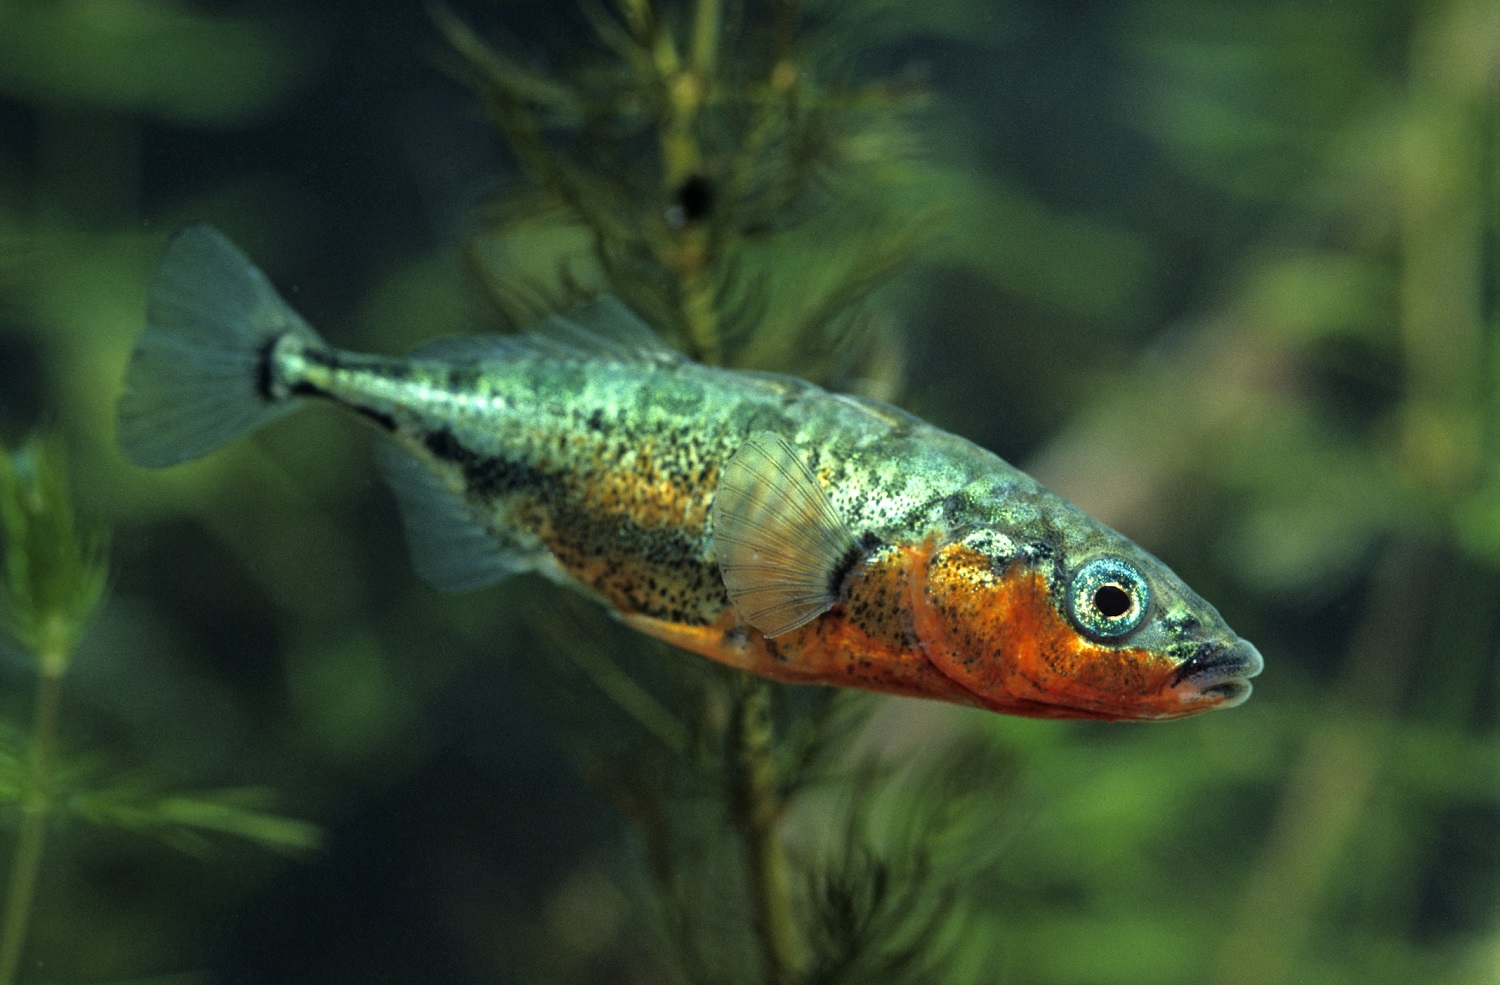 ‘Jumping’ genes let fish move from sea to fresh water